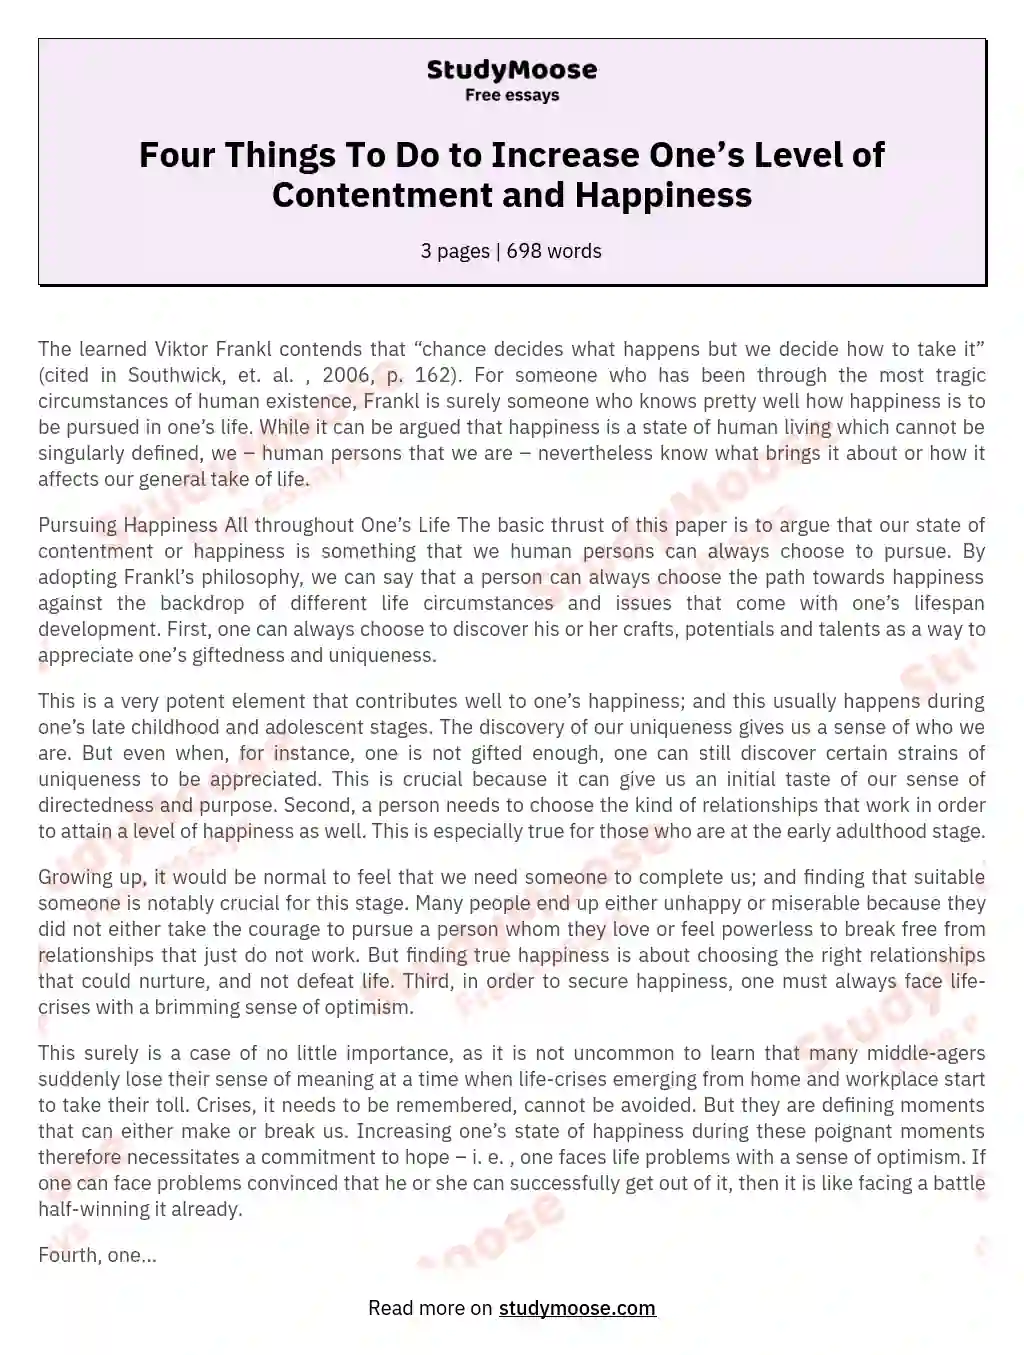 Four Things To Do to Increase One’s Level of Contentment and Happiness essay